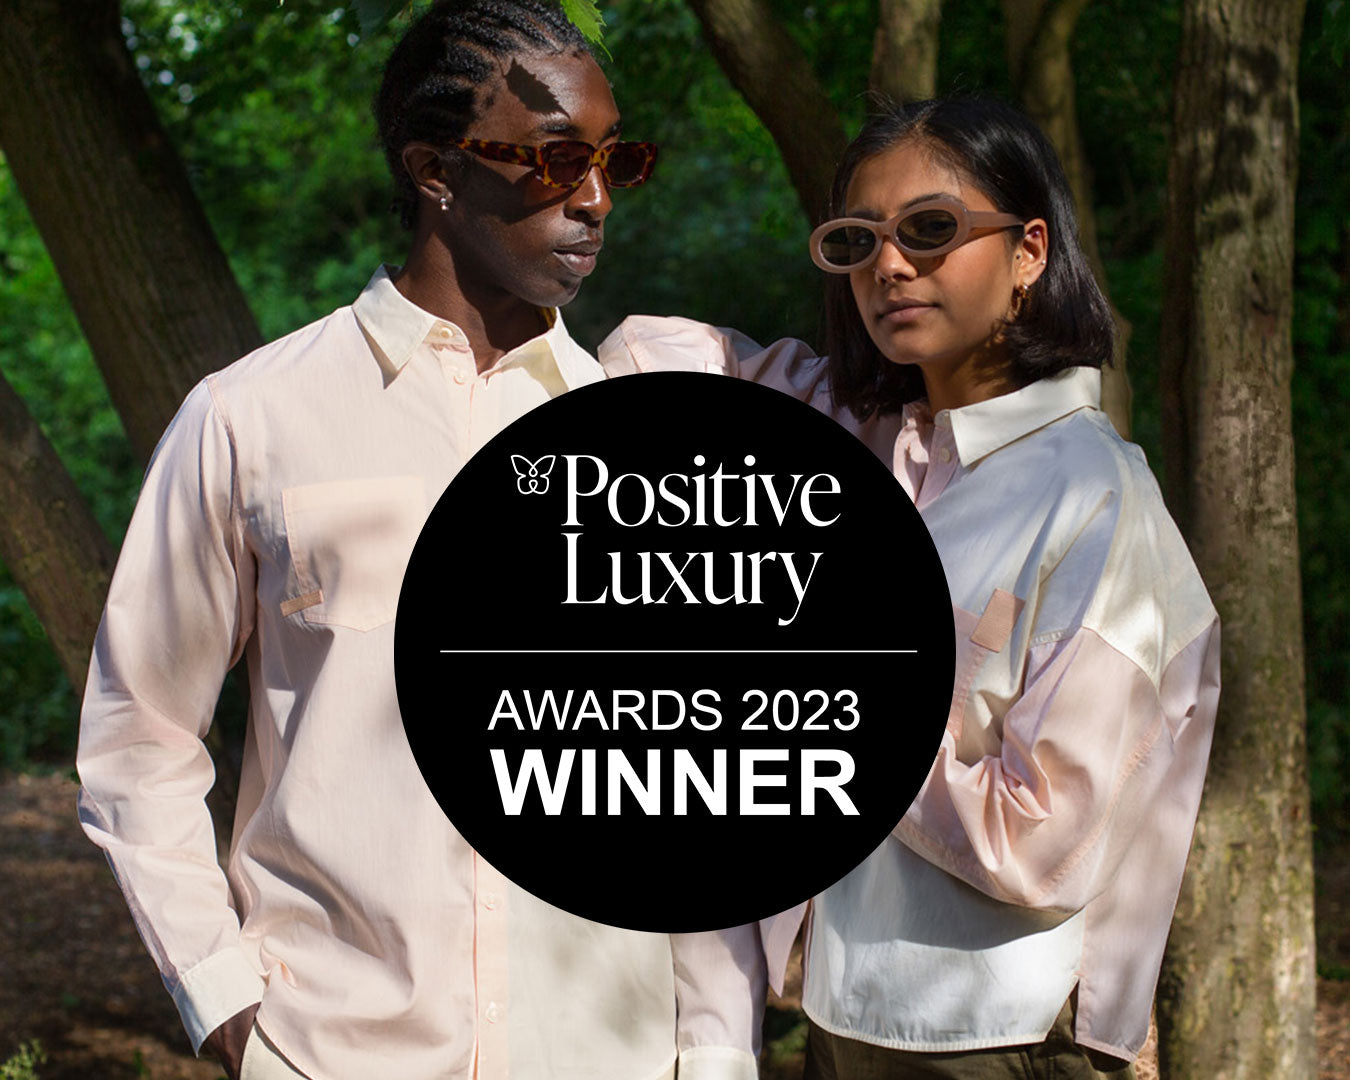 Saywood announced winner of the Positive Luxury Breakthrough Business of the Year Award 2023